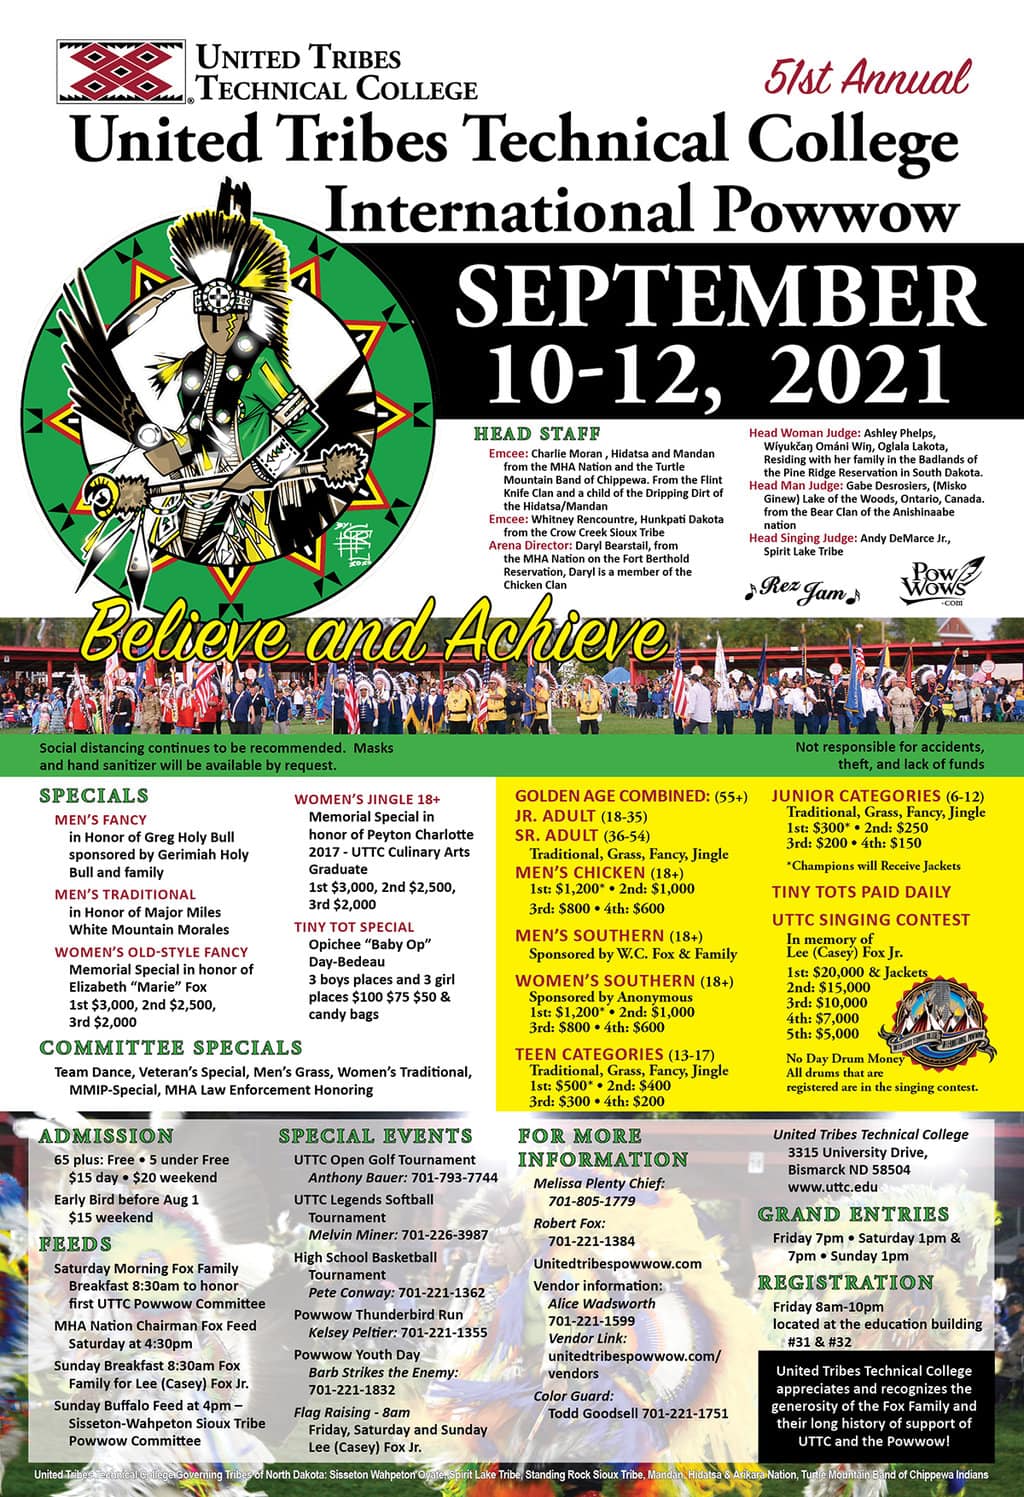 51st Annual United Tribes Technical College International Pow Wow 2021